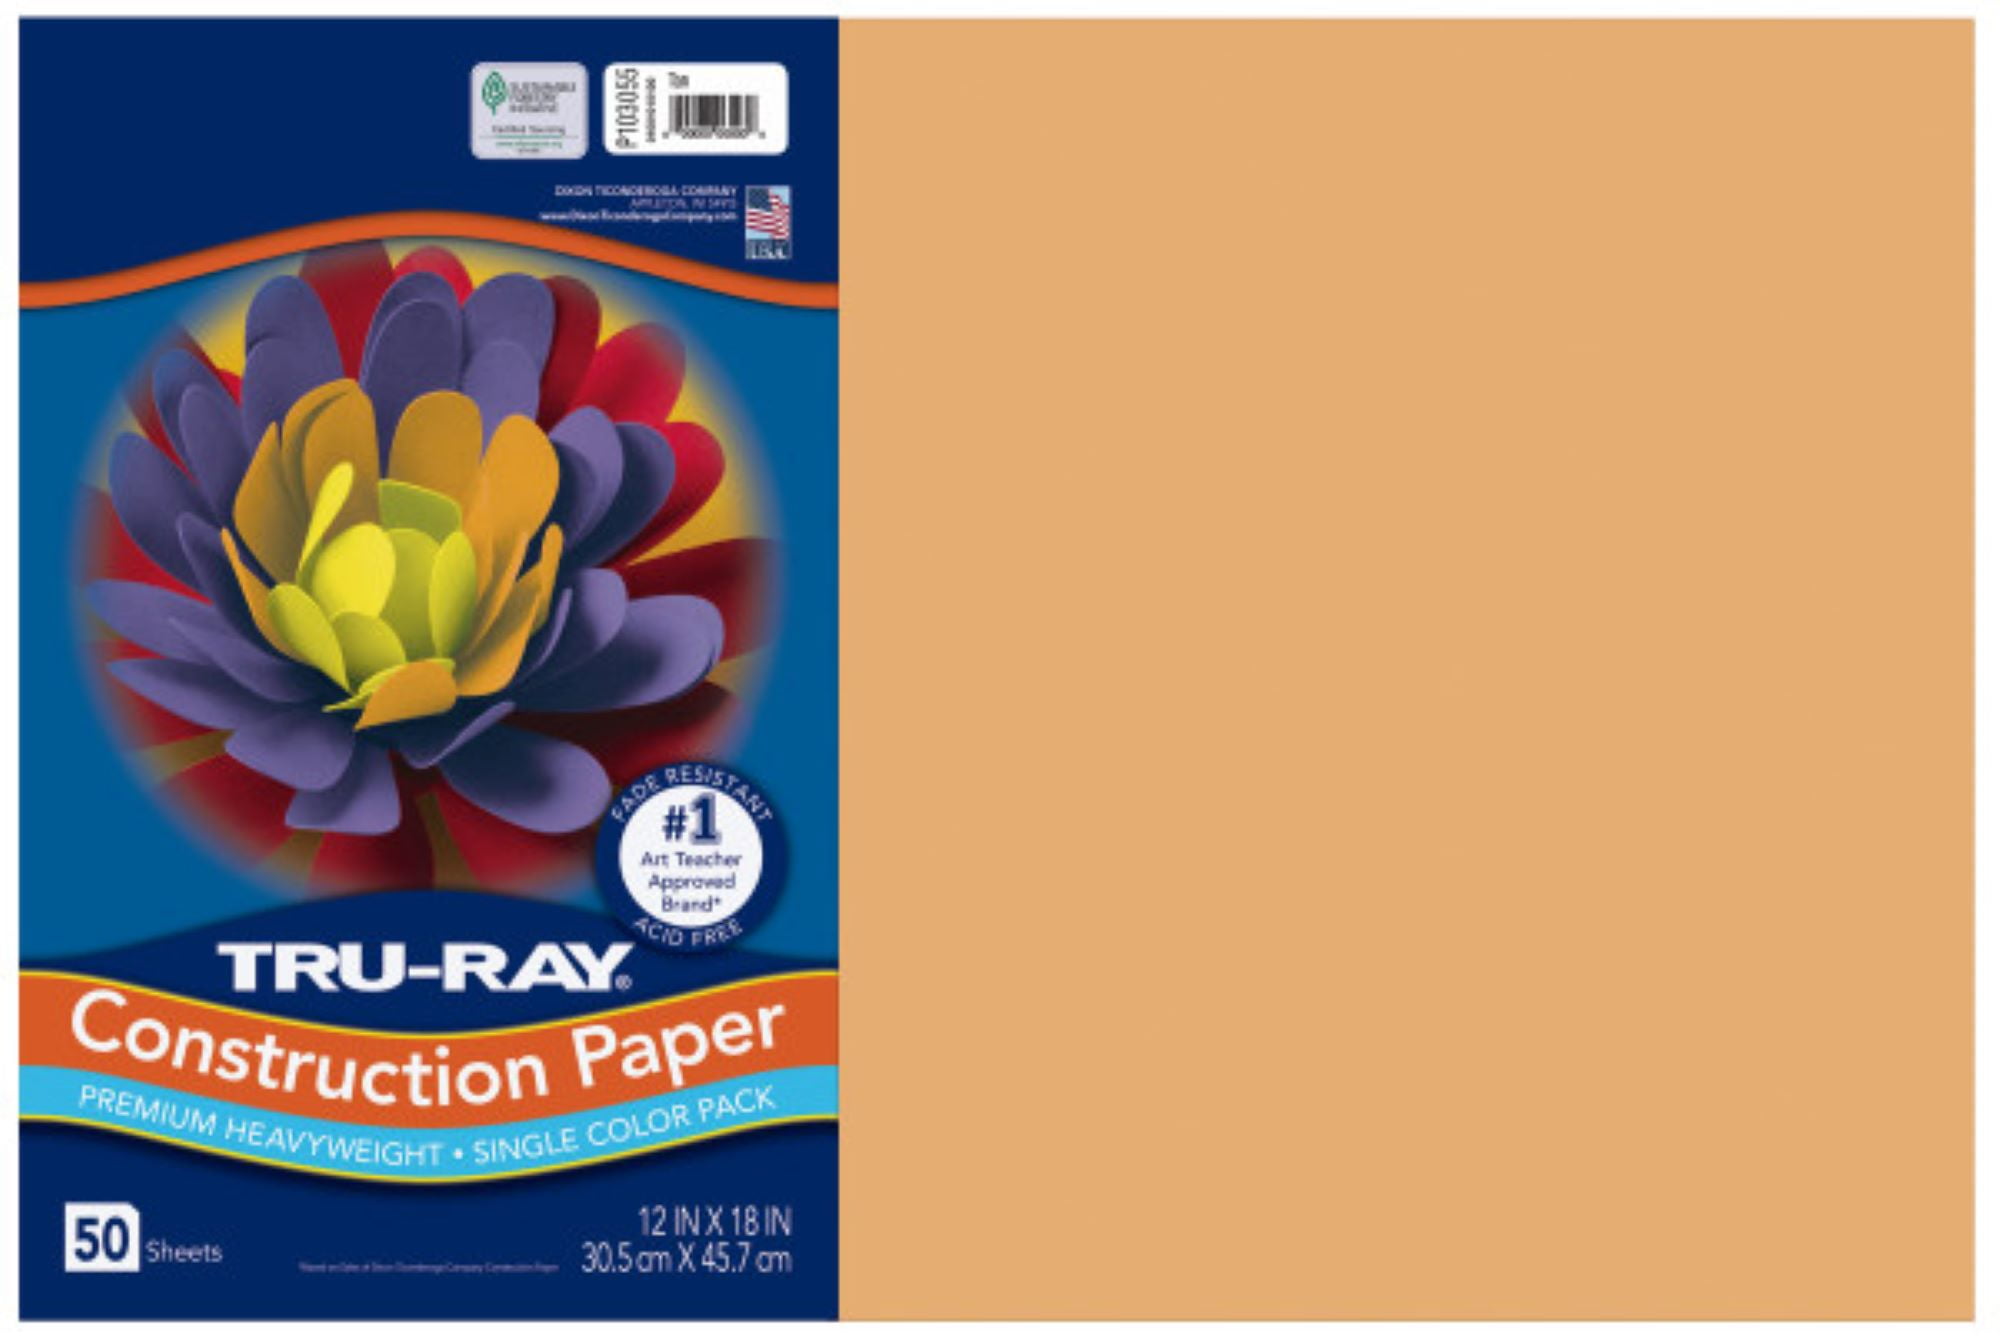 TRU-RAY® CONSTRUCTION PAPER 9 X 12 LILAC COLOR, 50 SHEETS - Multi access  office